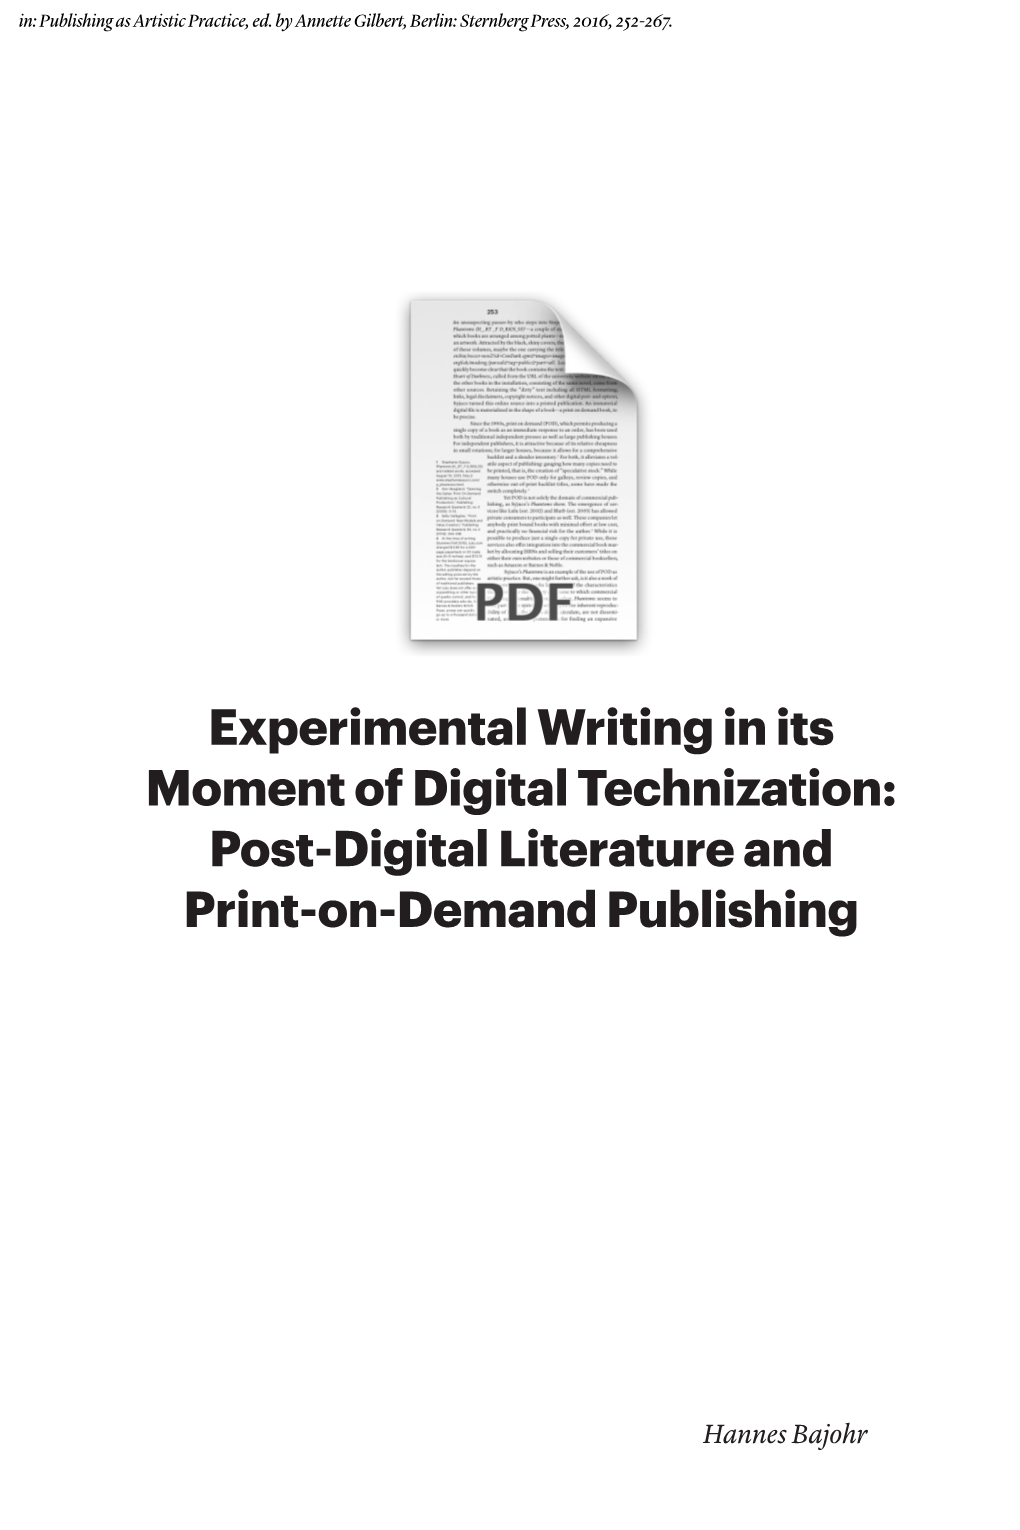 Experimental Writing in Its Moment of Digital Technization: Post-Digital Literature and Print-On-Demand Publishing